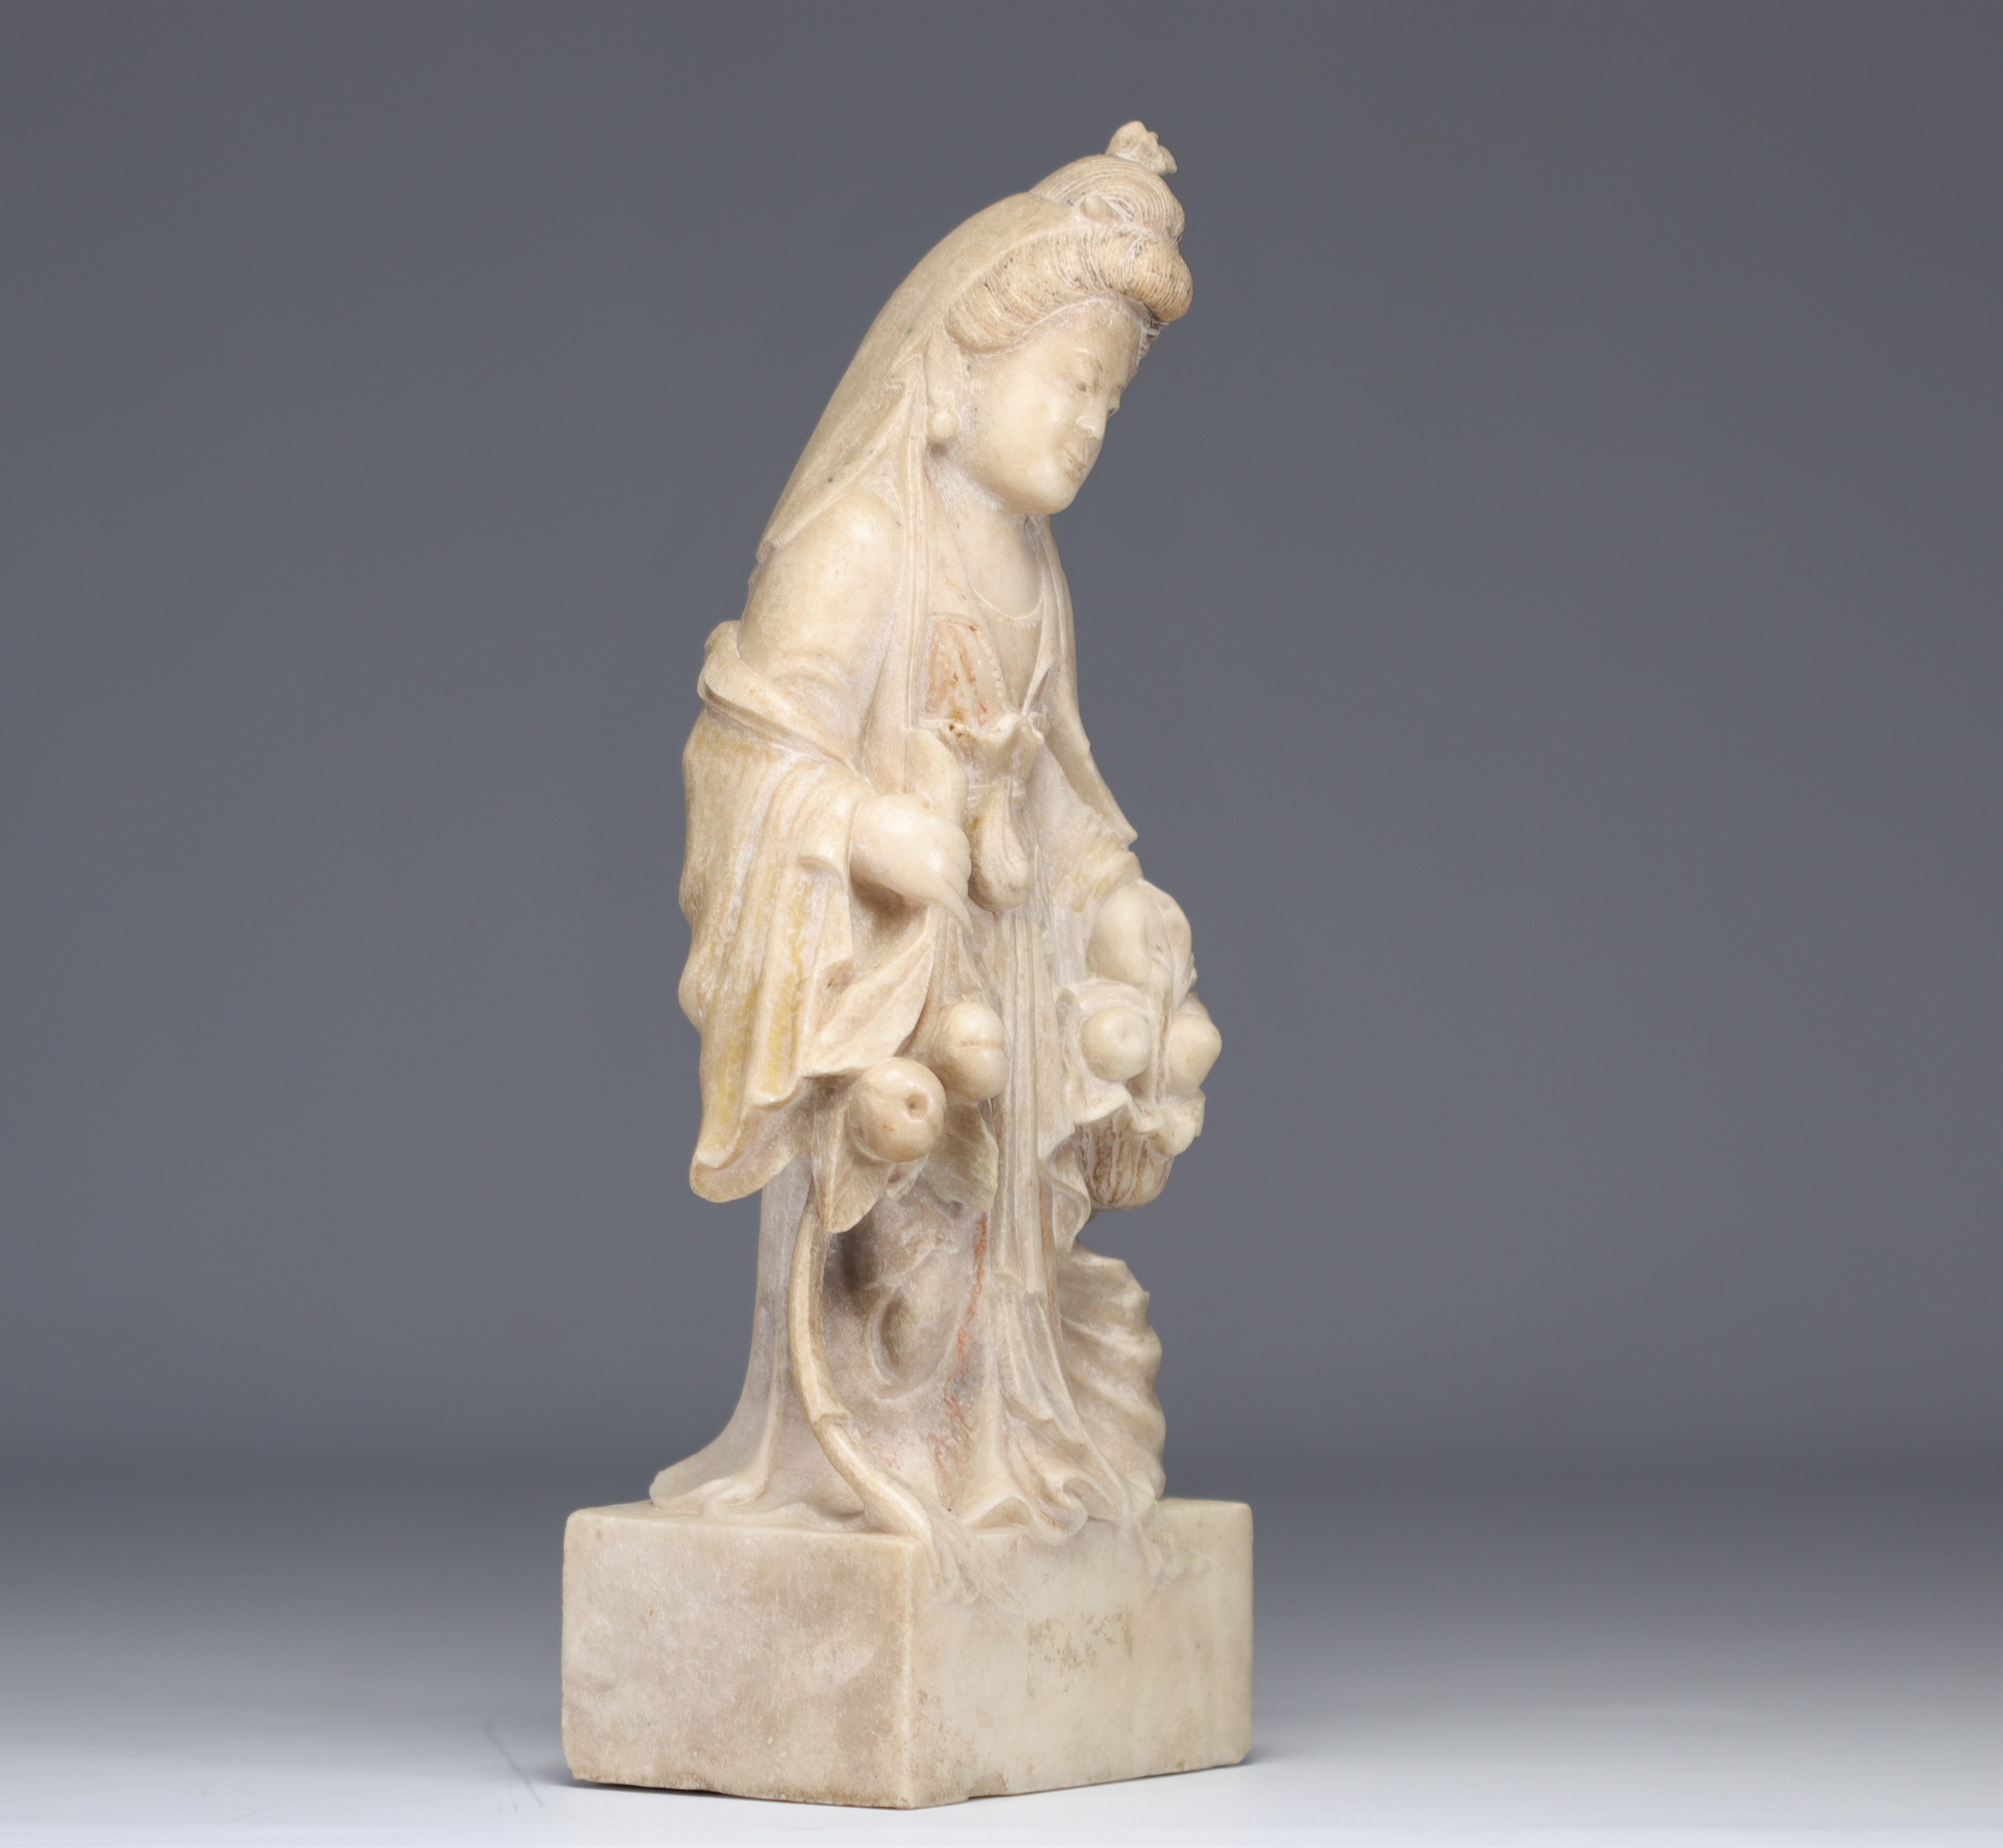 Marble sculpture of a young woman with fruit probably from the Ming period (æ˜Žæœ) - Image 3 of 4